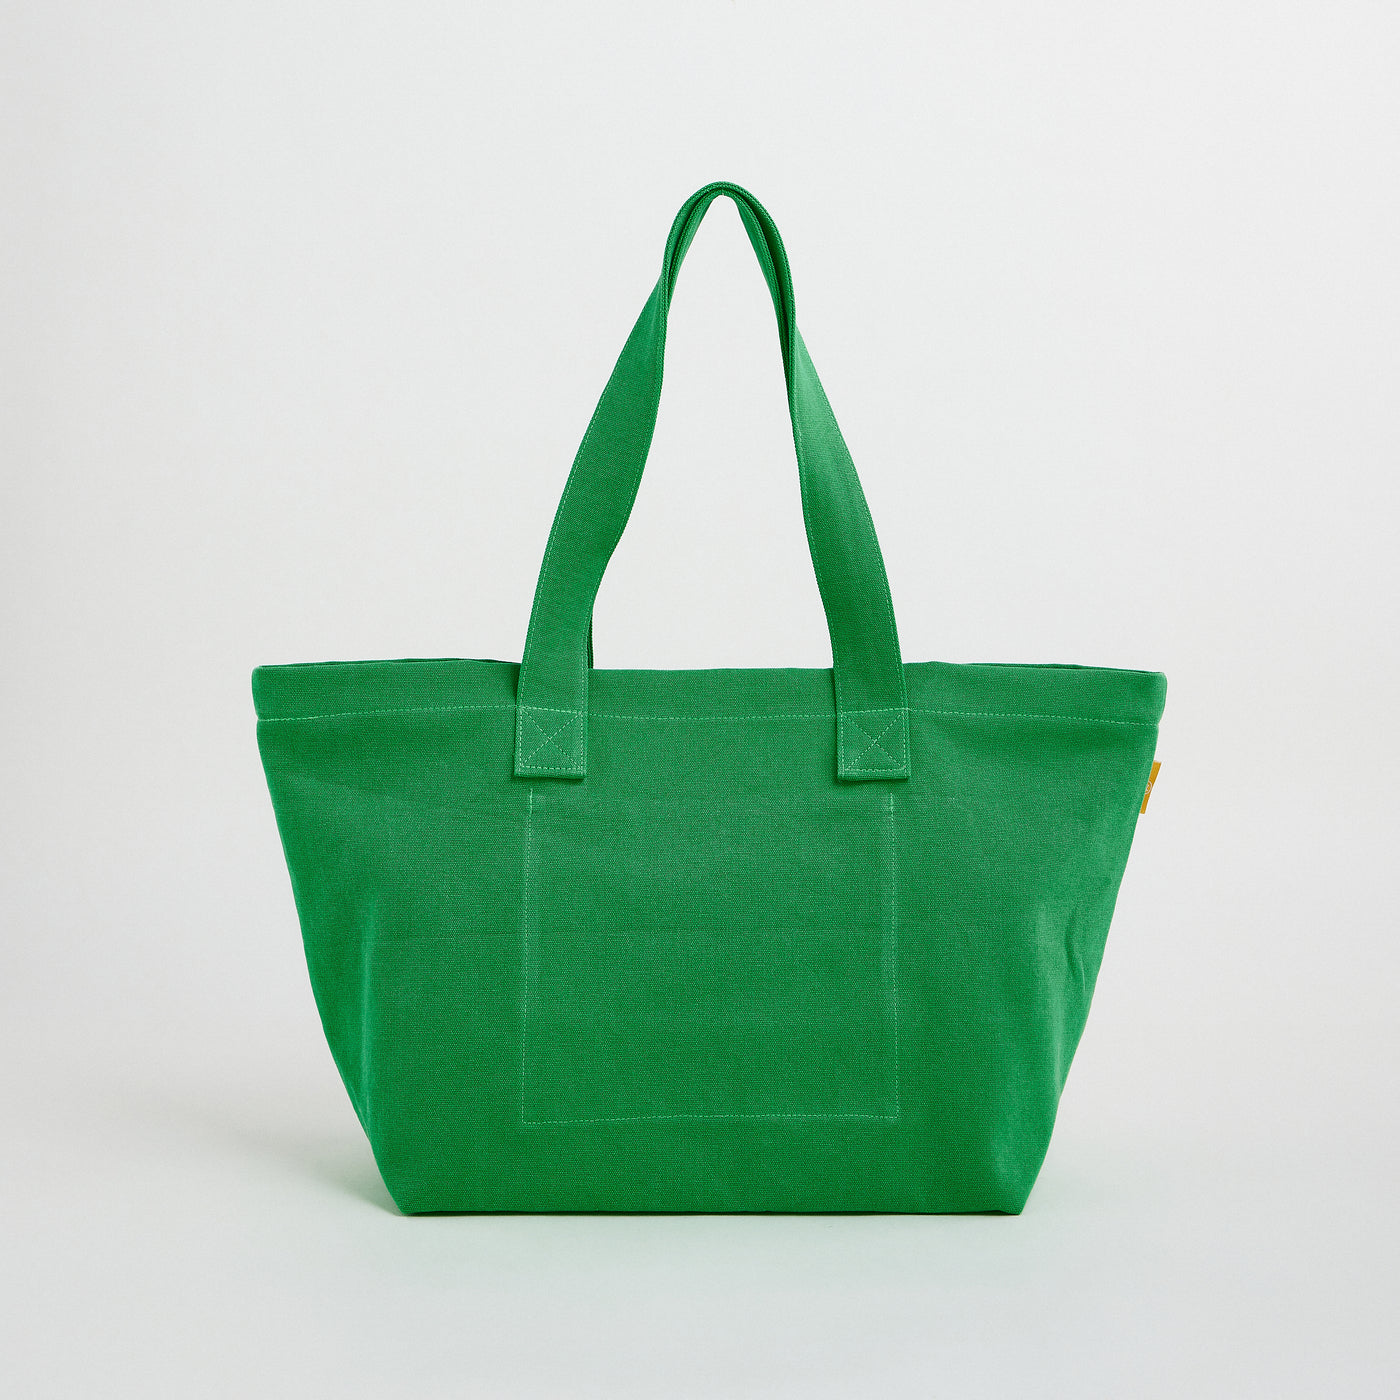 Mustard Marché Market Tote - Lime